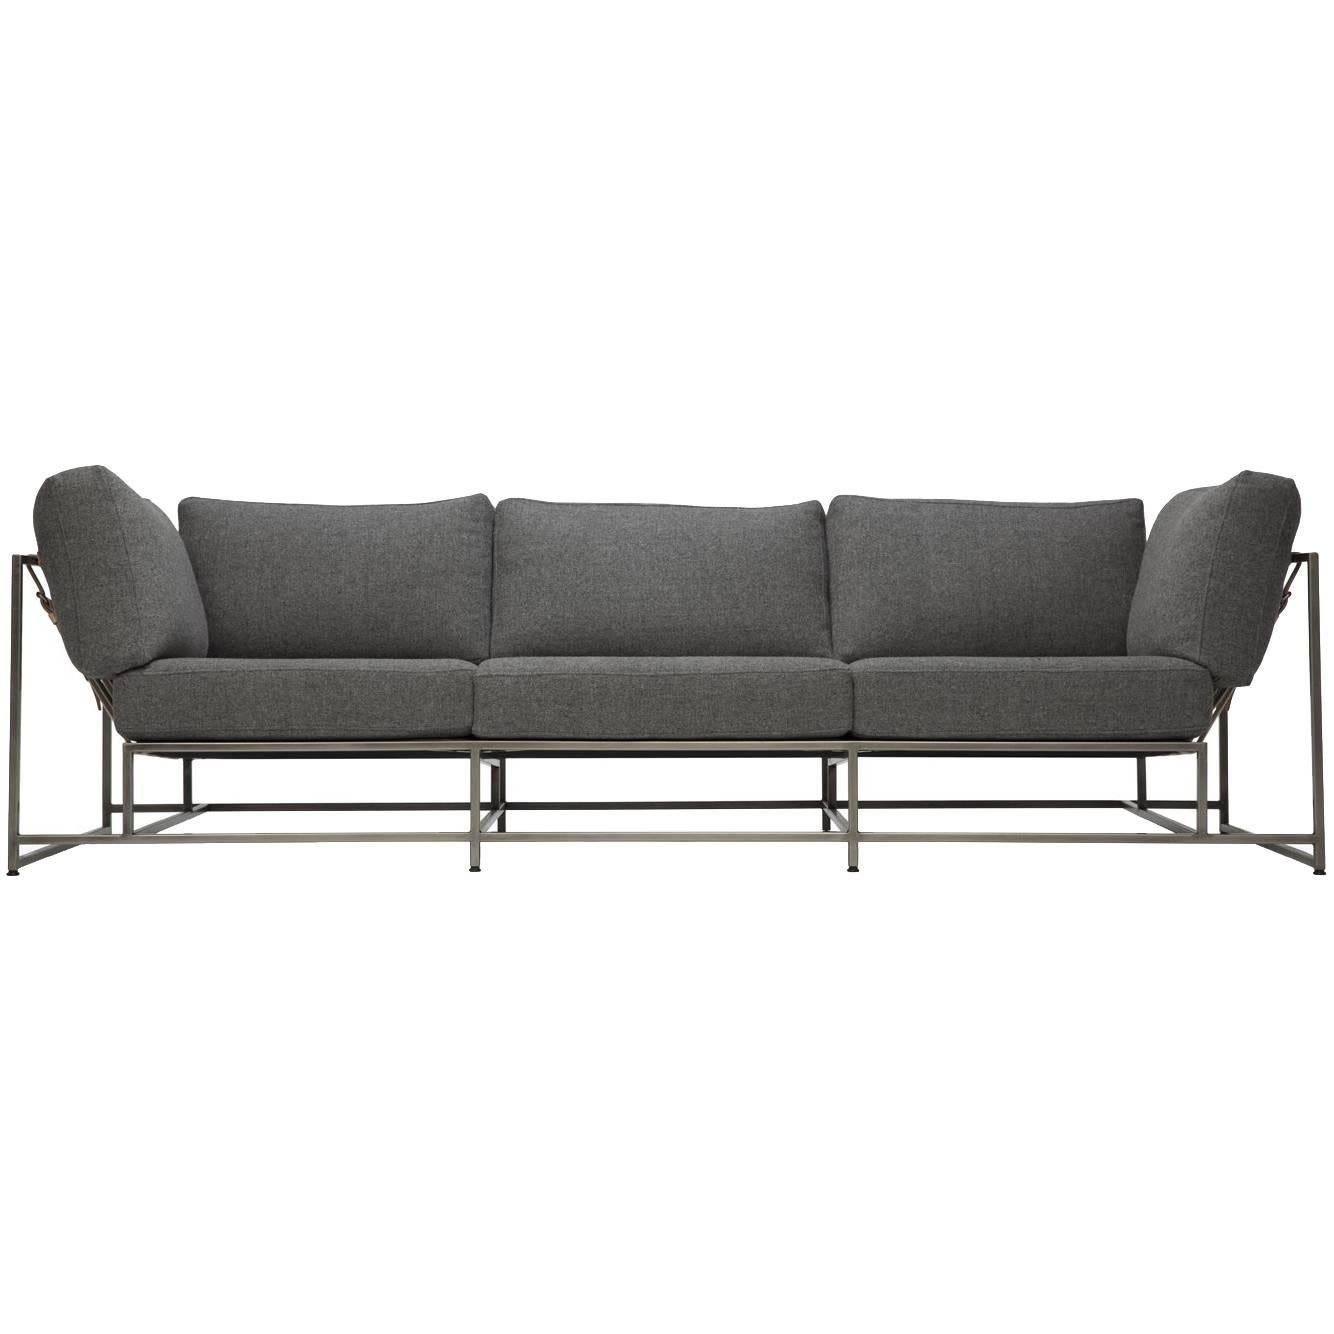 Faribault Grey Wool and Antique Nickel Sofa For Sale